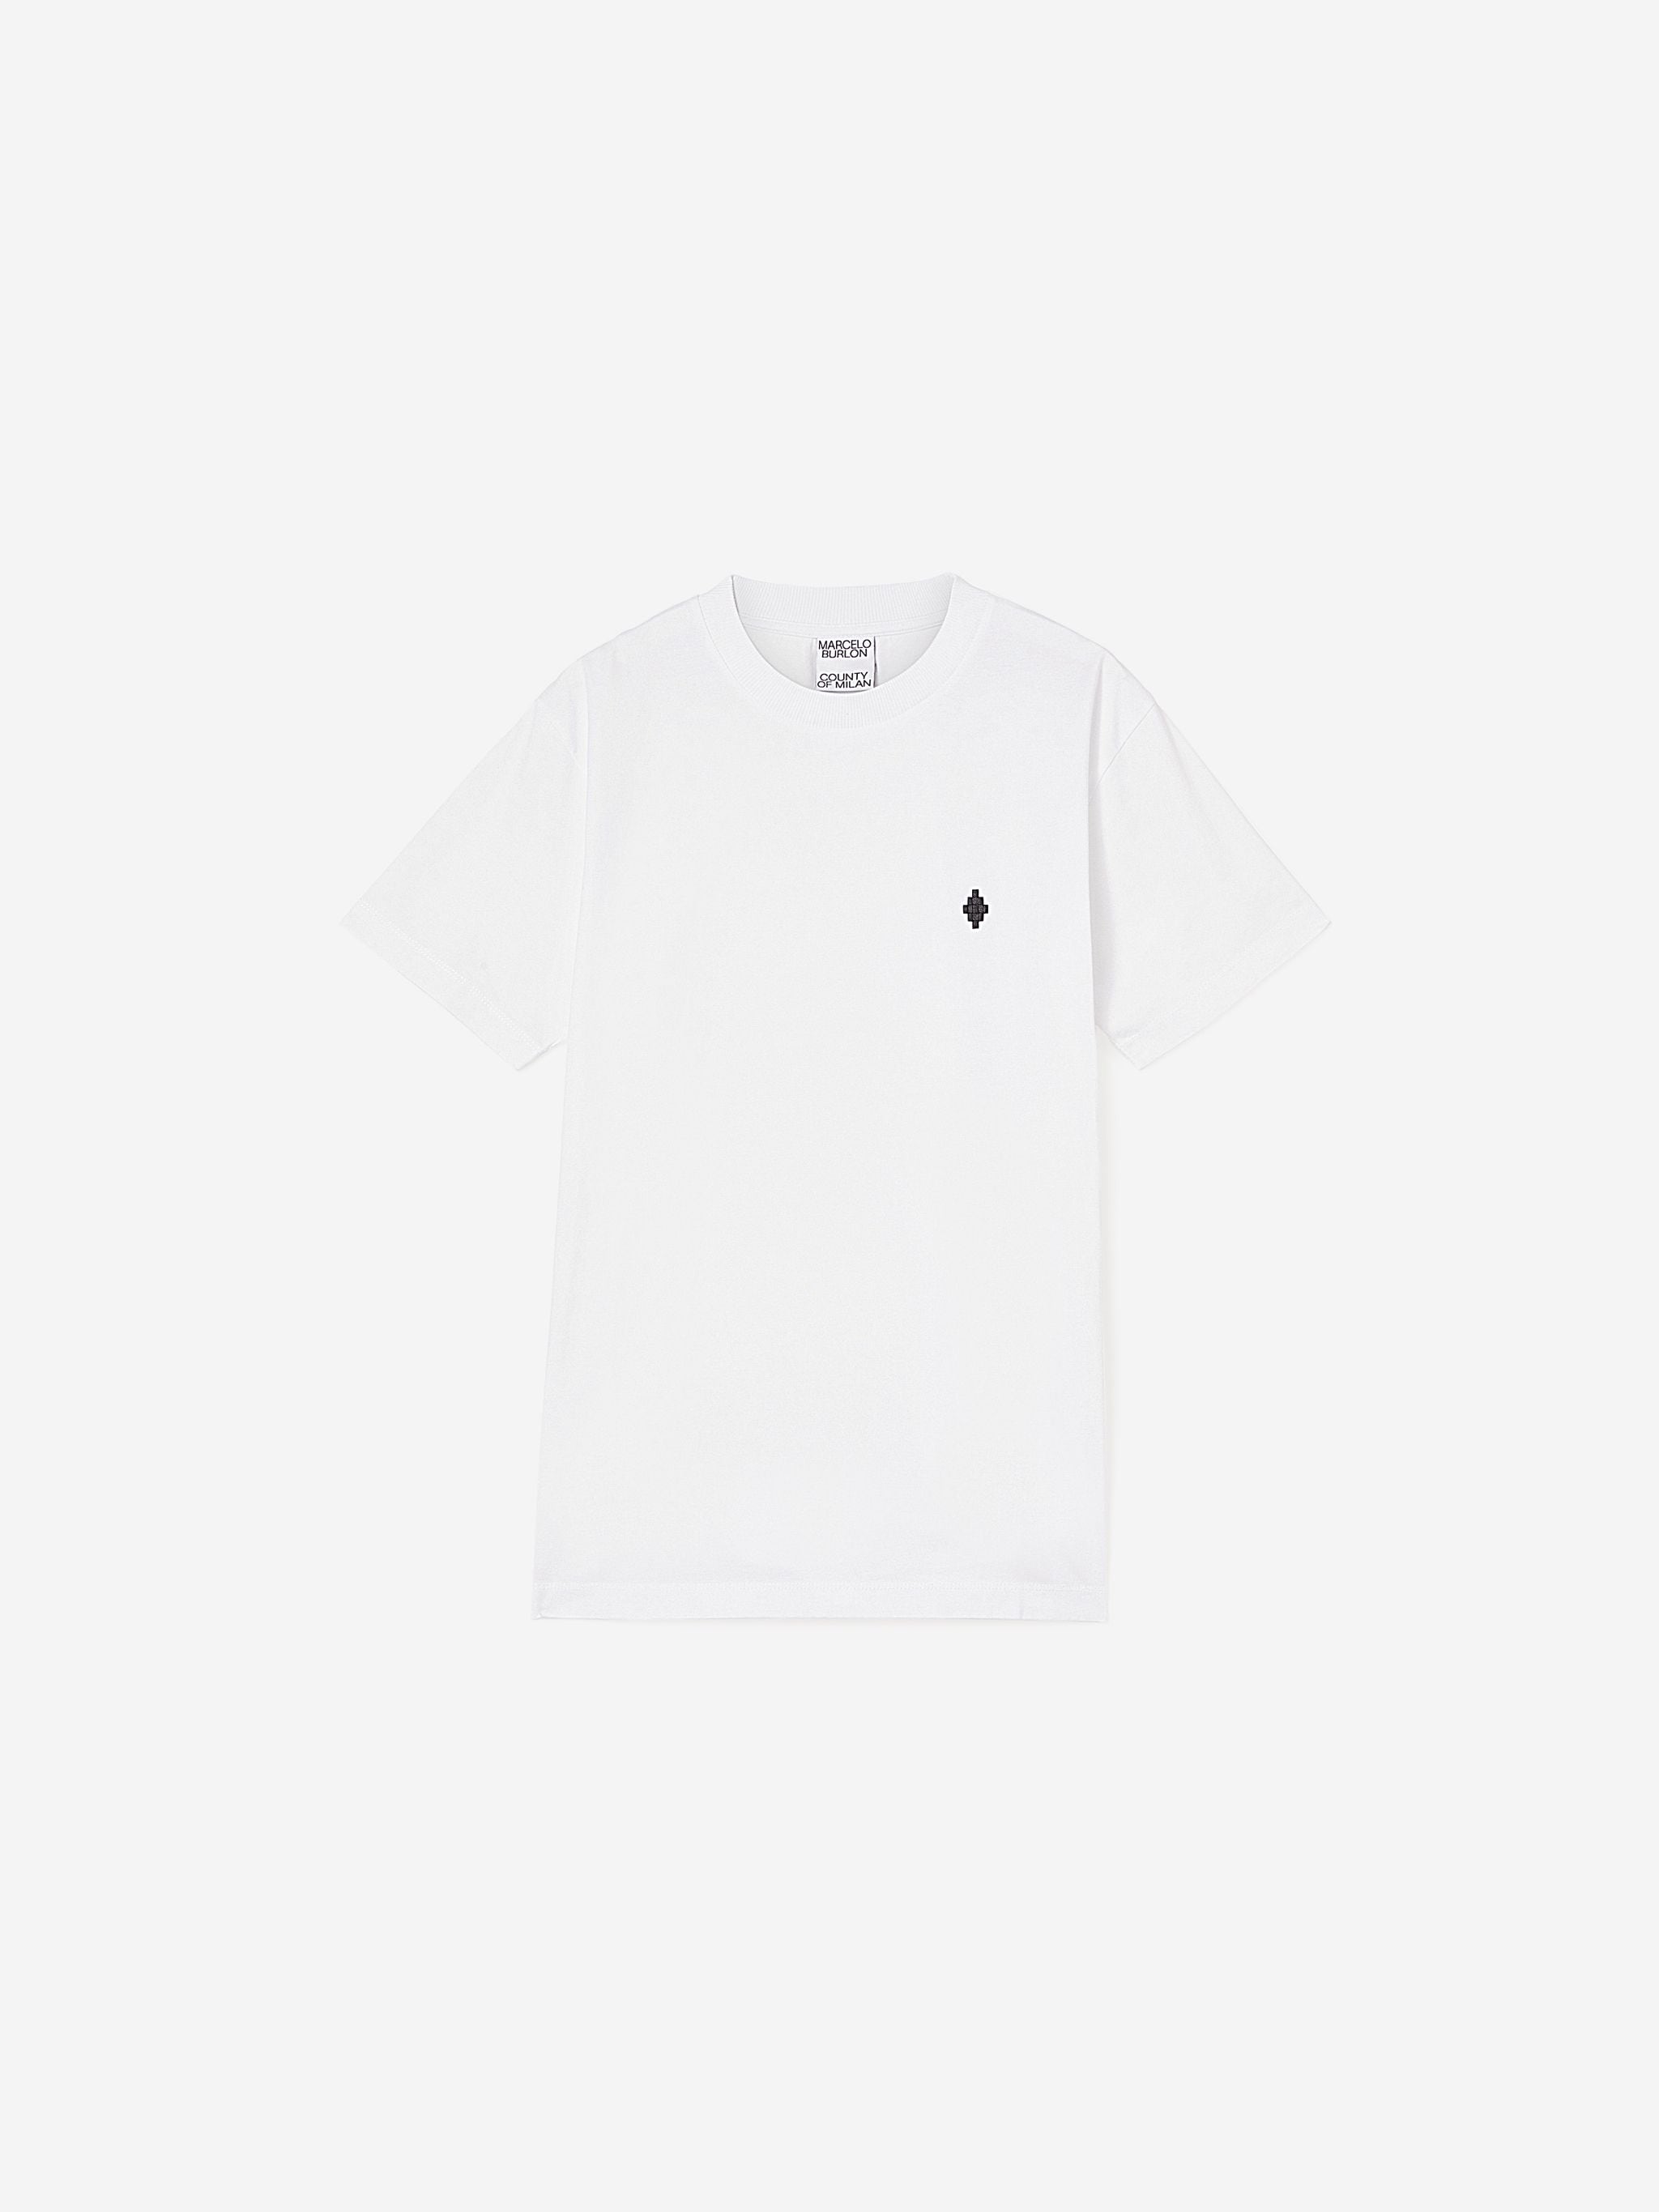 White cotton cross-motif cotton T-shirt from Marcelo Burlon County of Milan featuring signature Cross motif, round neck, short sleeves and straight hem.